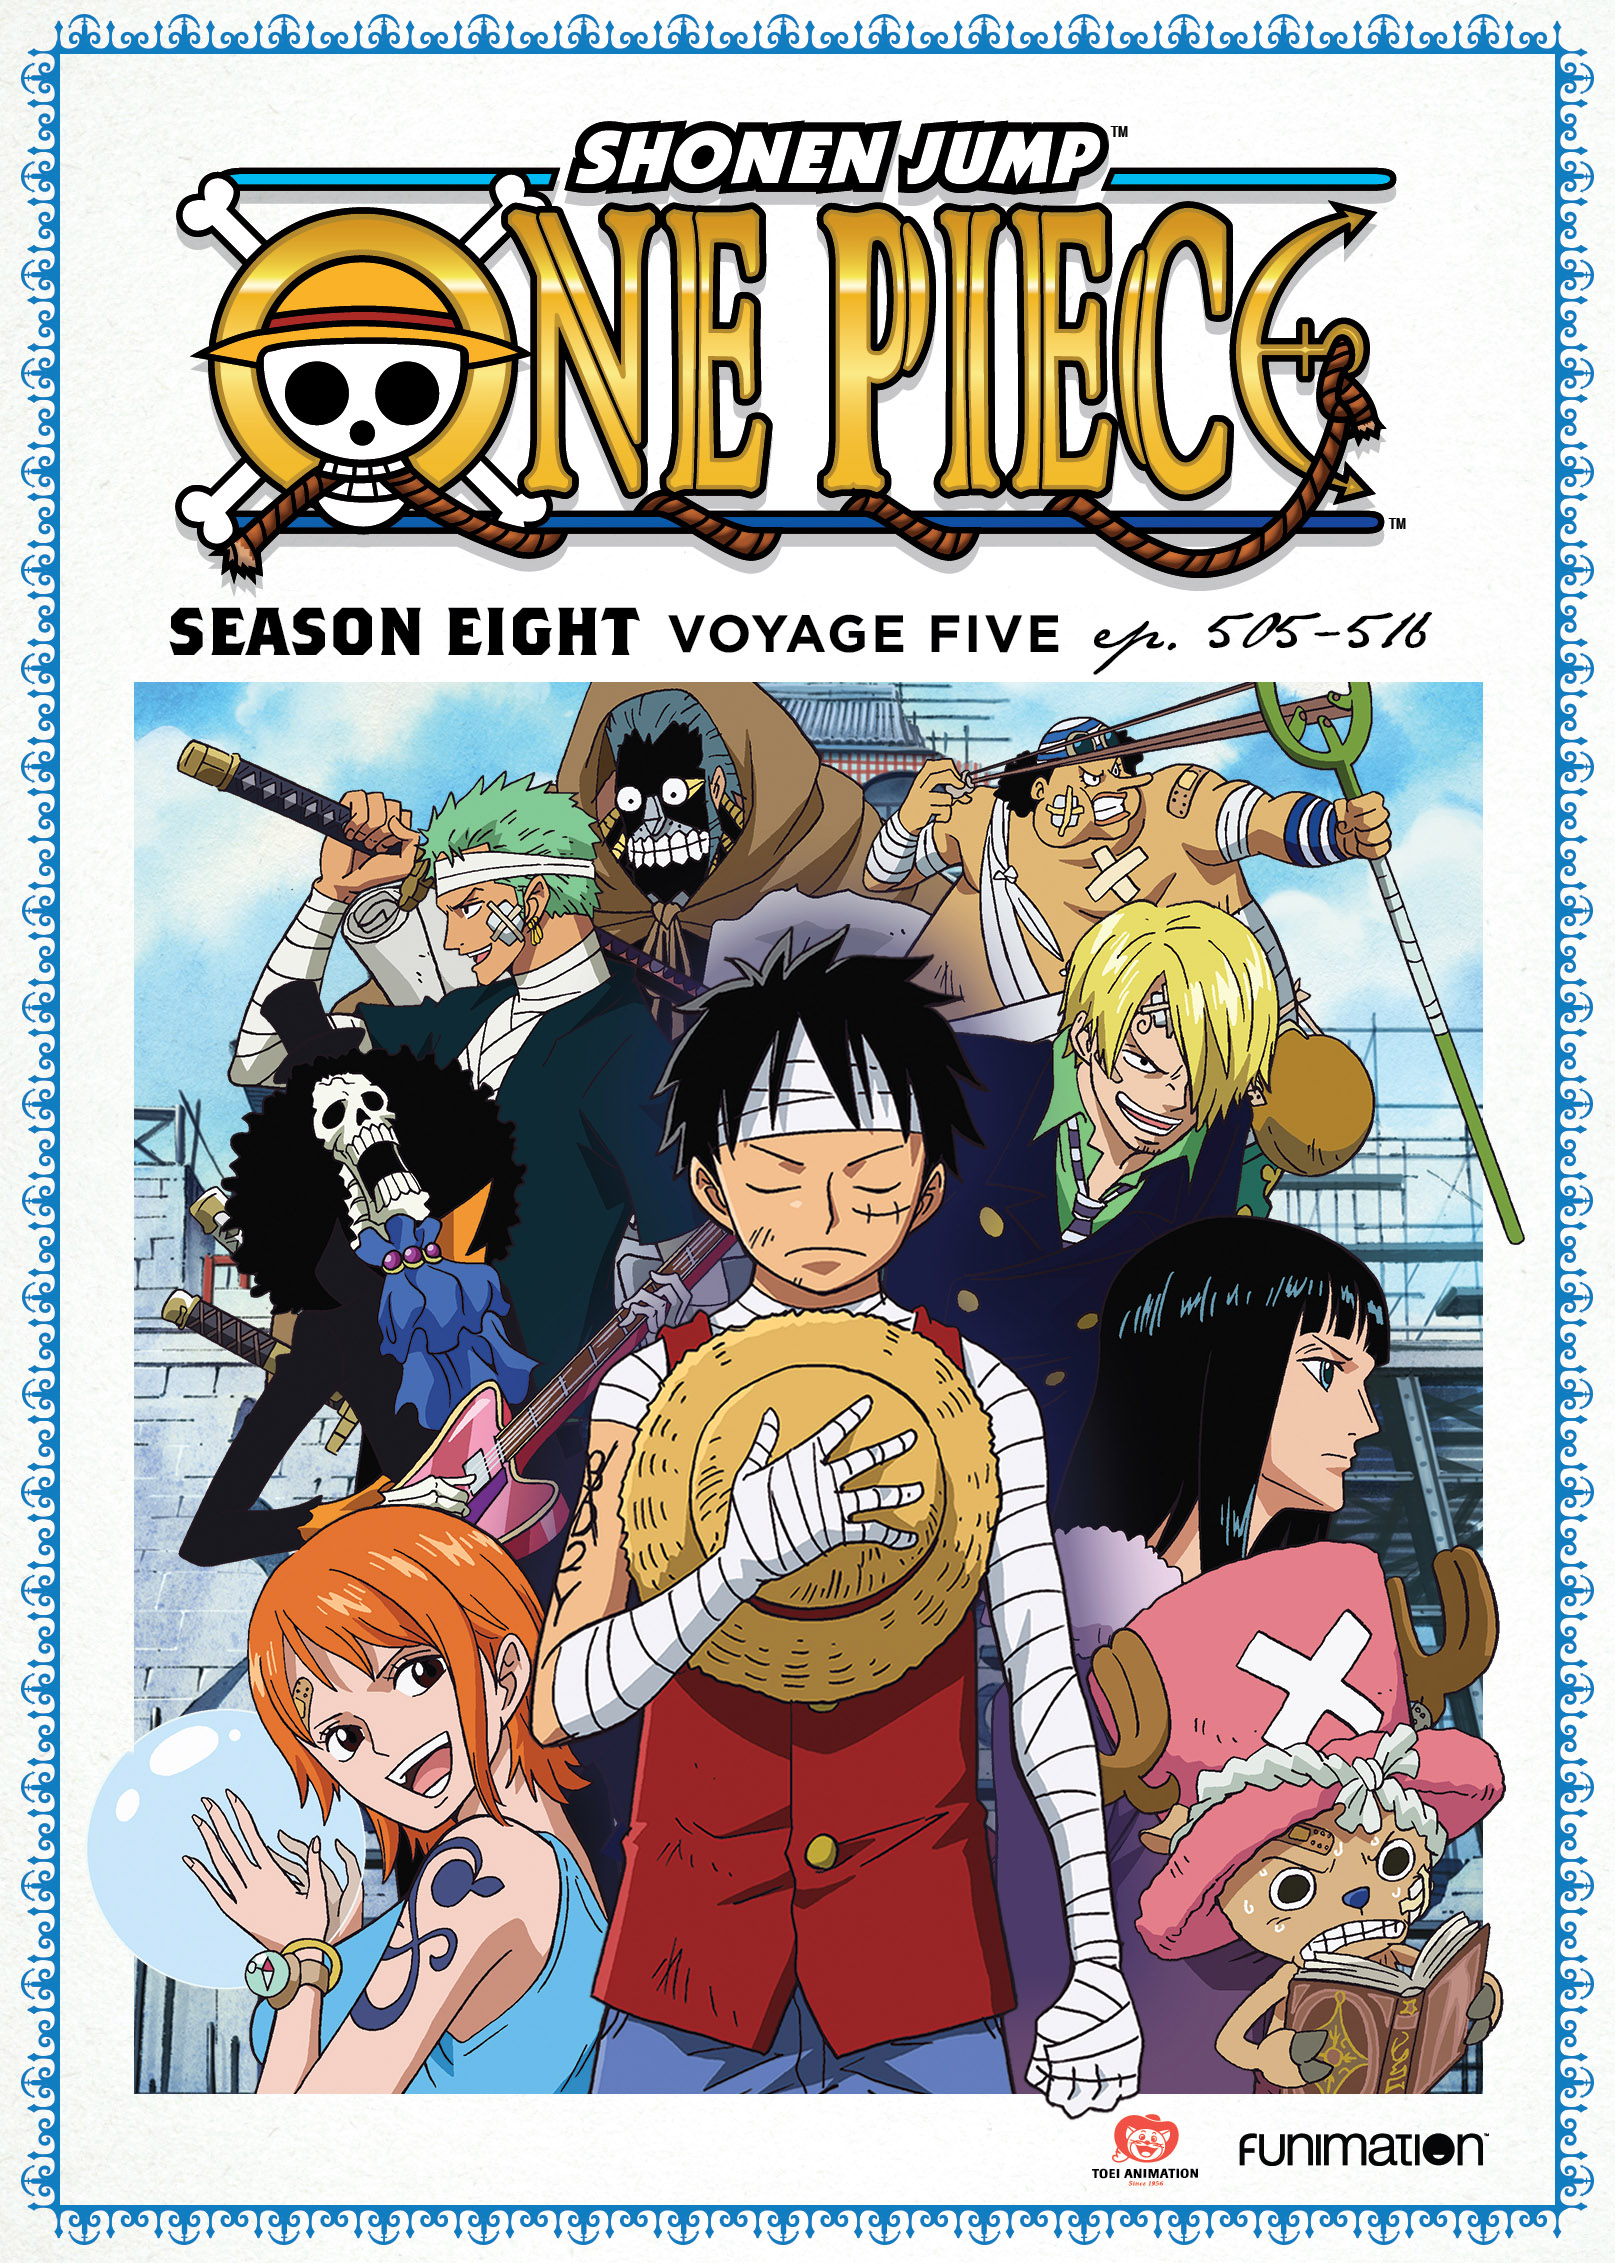 Episode List and DVD Releases/Season 5, One Piece Wiki